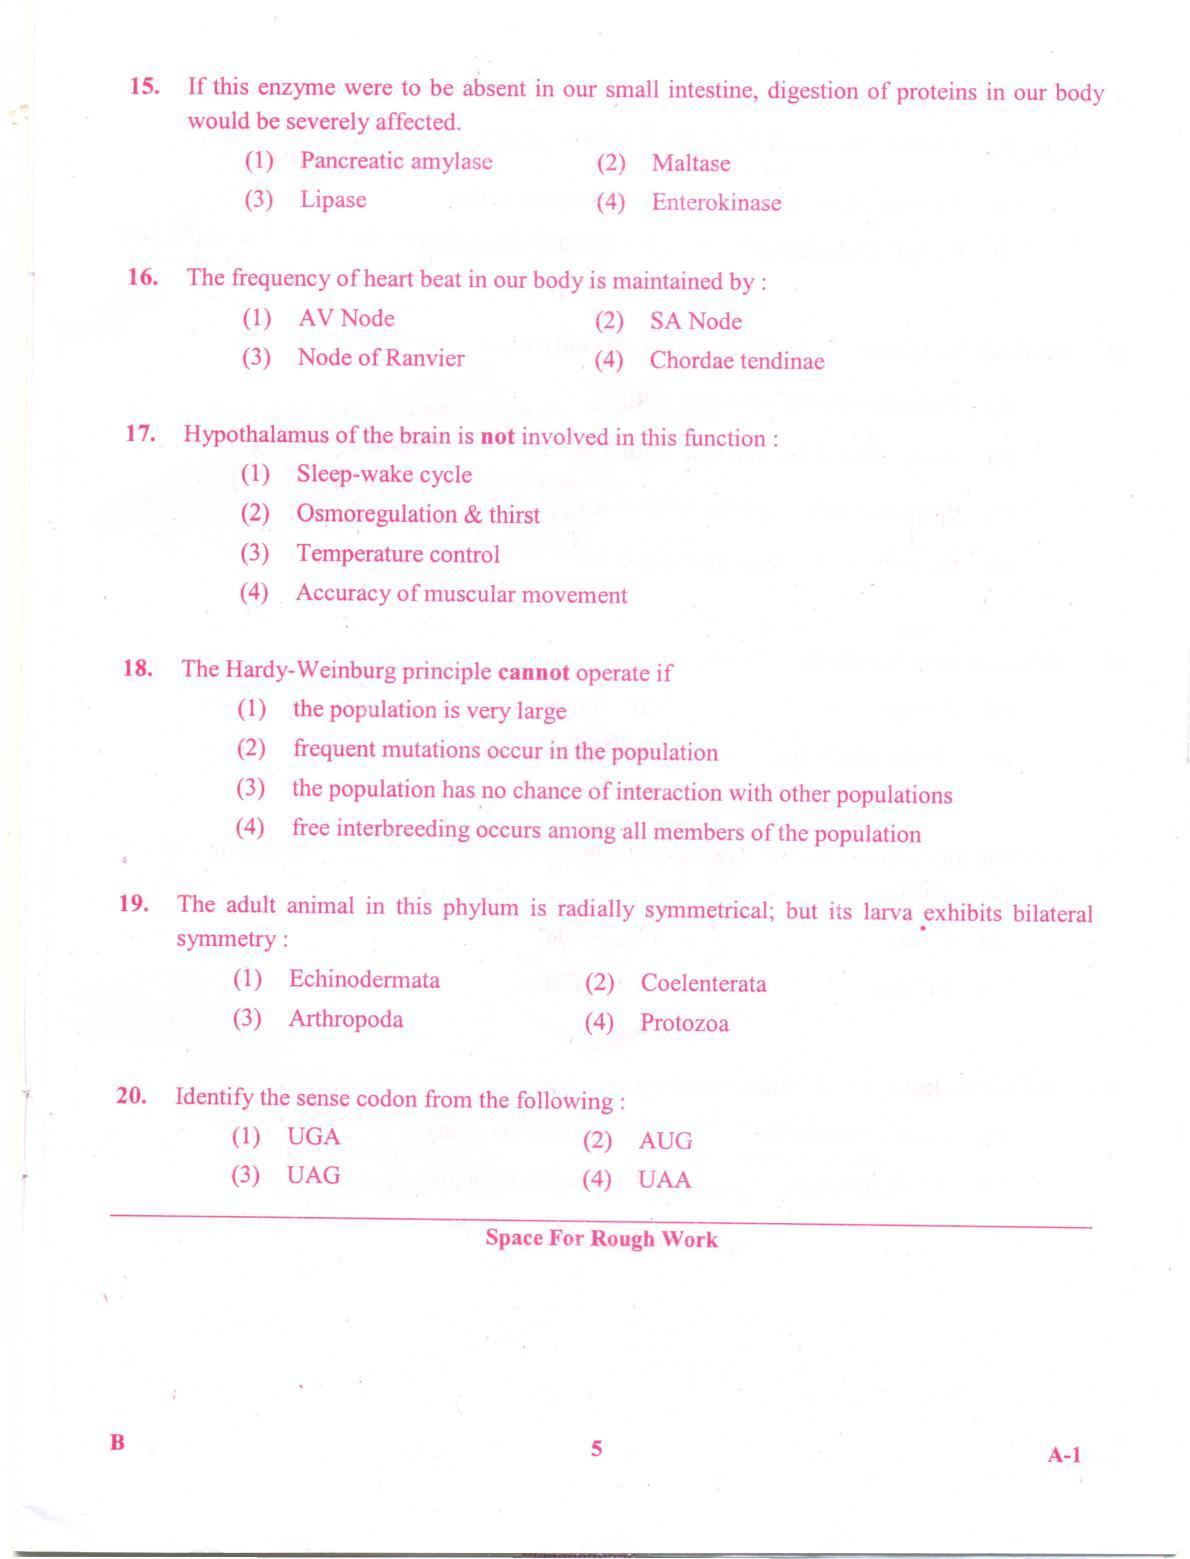 KCET Biology 2012 Question Papers - Page 5